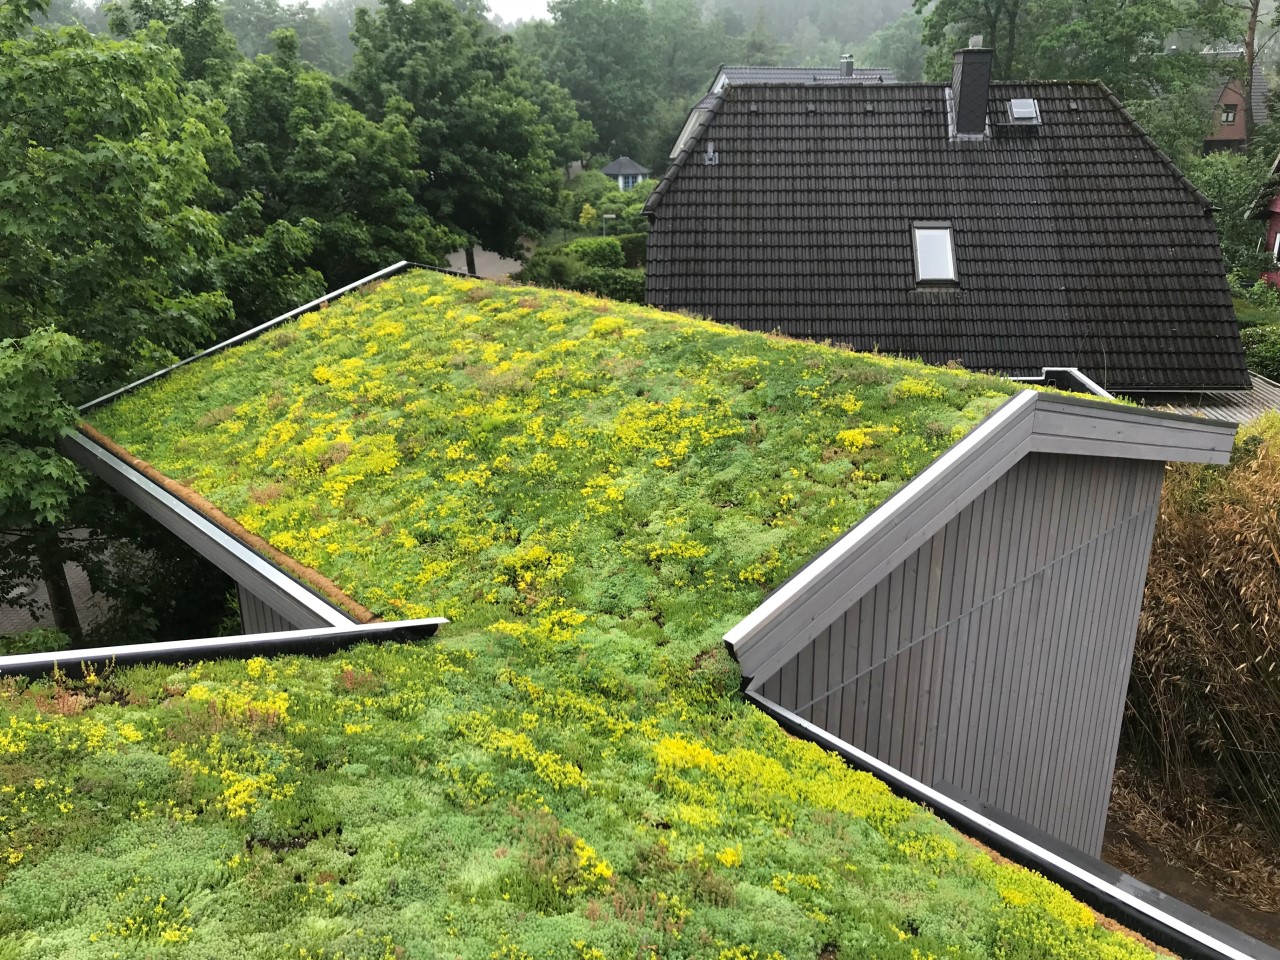 Pitched green roof in Buchholz in der Nordheide, Germany